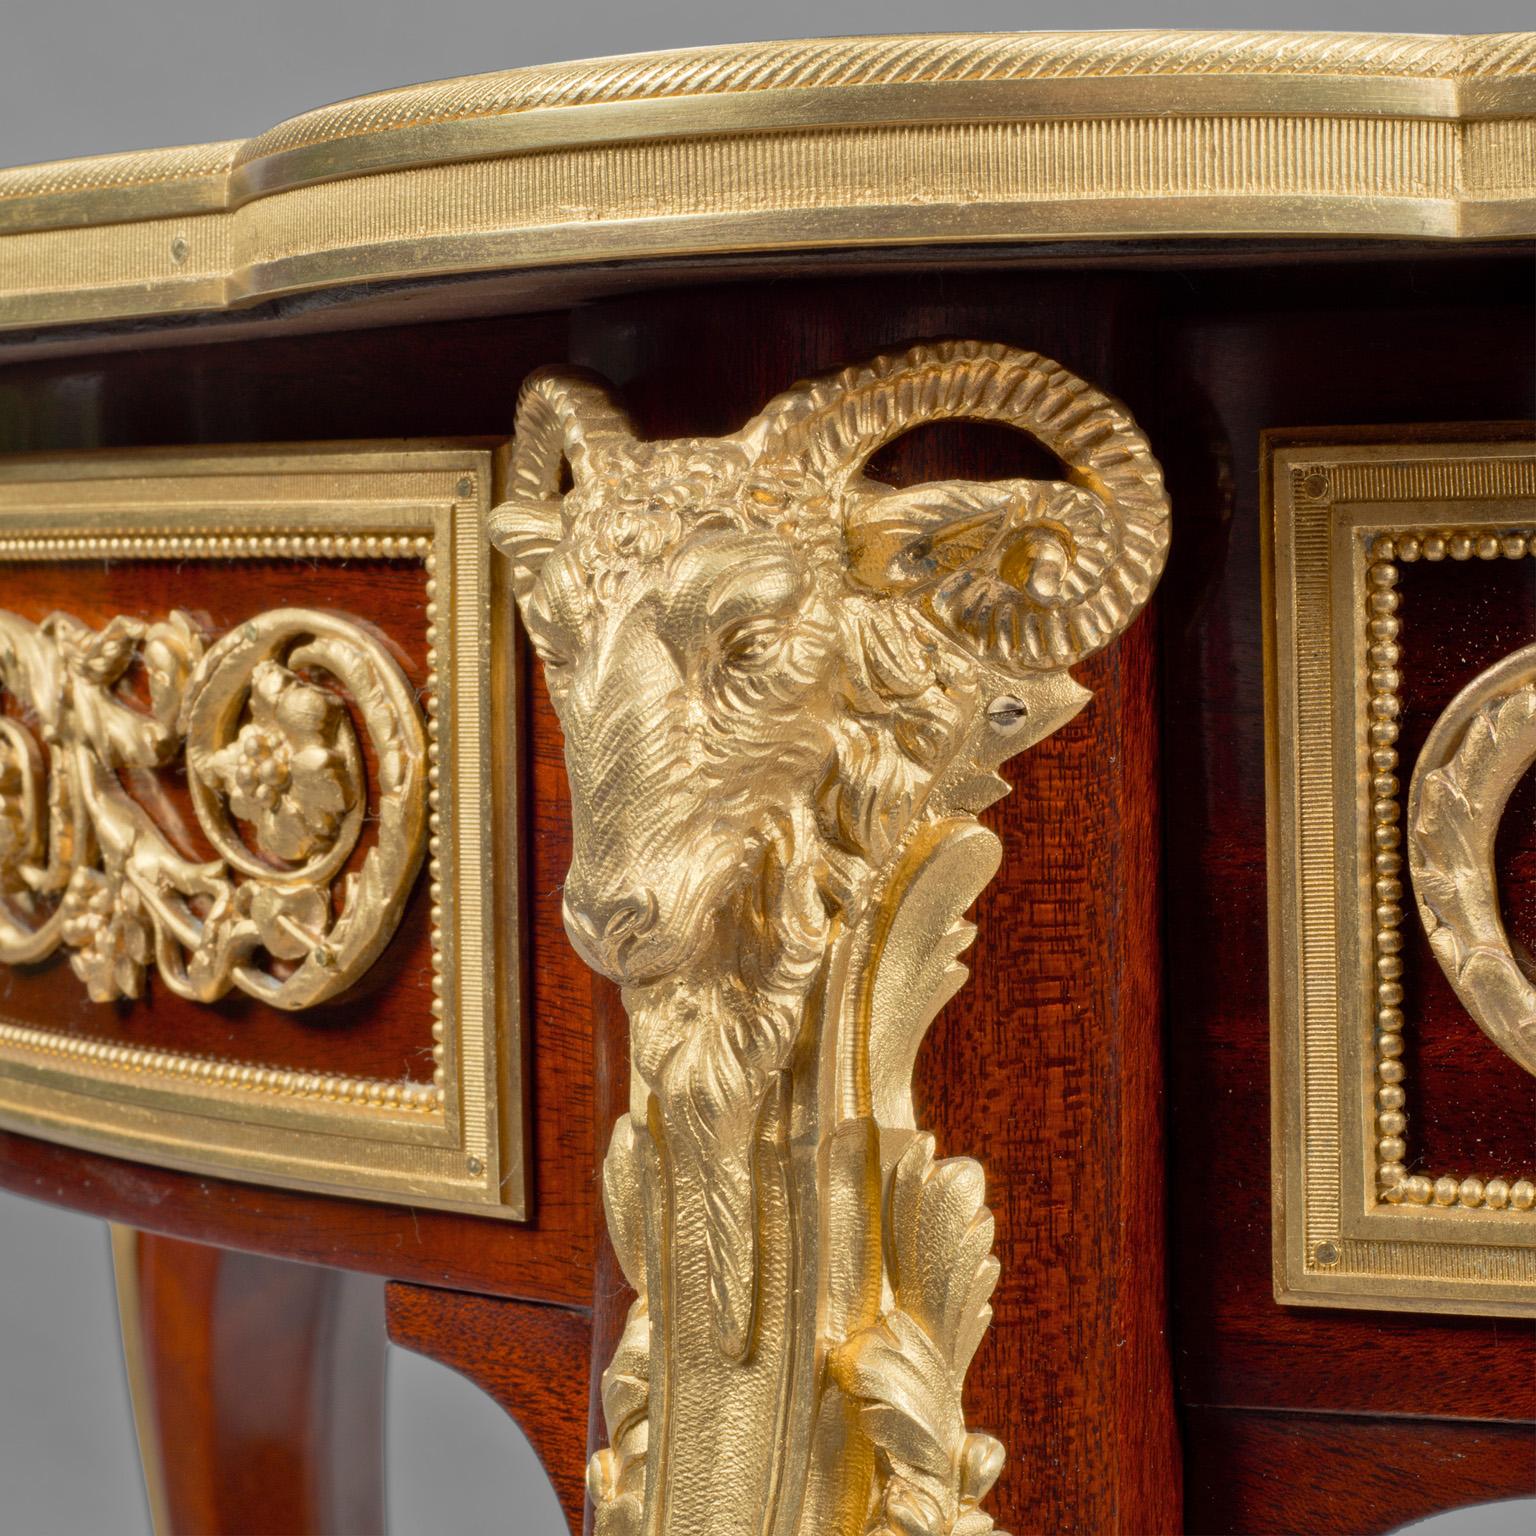 A fine Louis XVI style mahogany gilt bronze mounted Guéridon.

This fine gilt bronze mounted mahogany Guéridon has a green marble top inset within a gilt bronze frame, above a frieze with panels enclosing a gilt bronze mask of Apollo flanked by